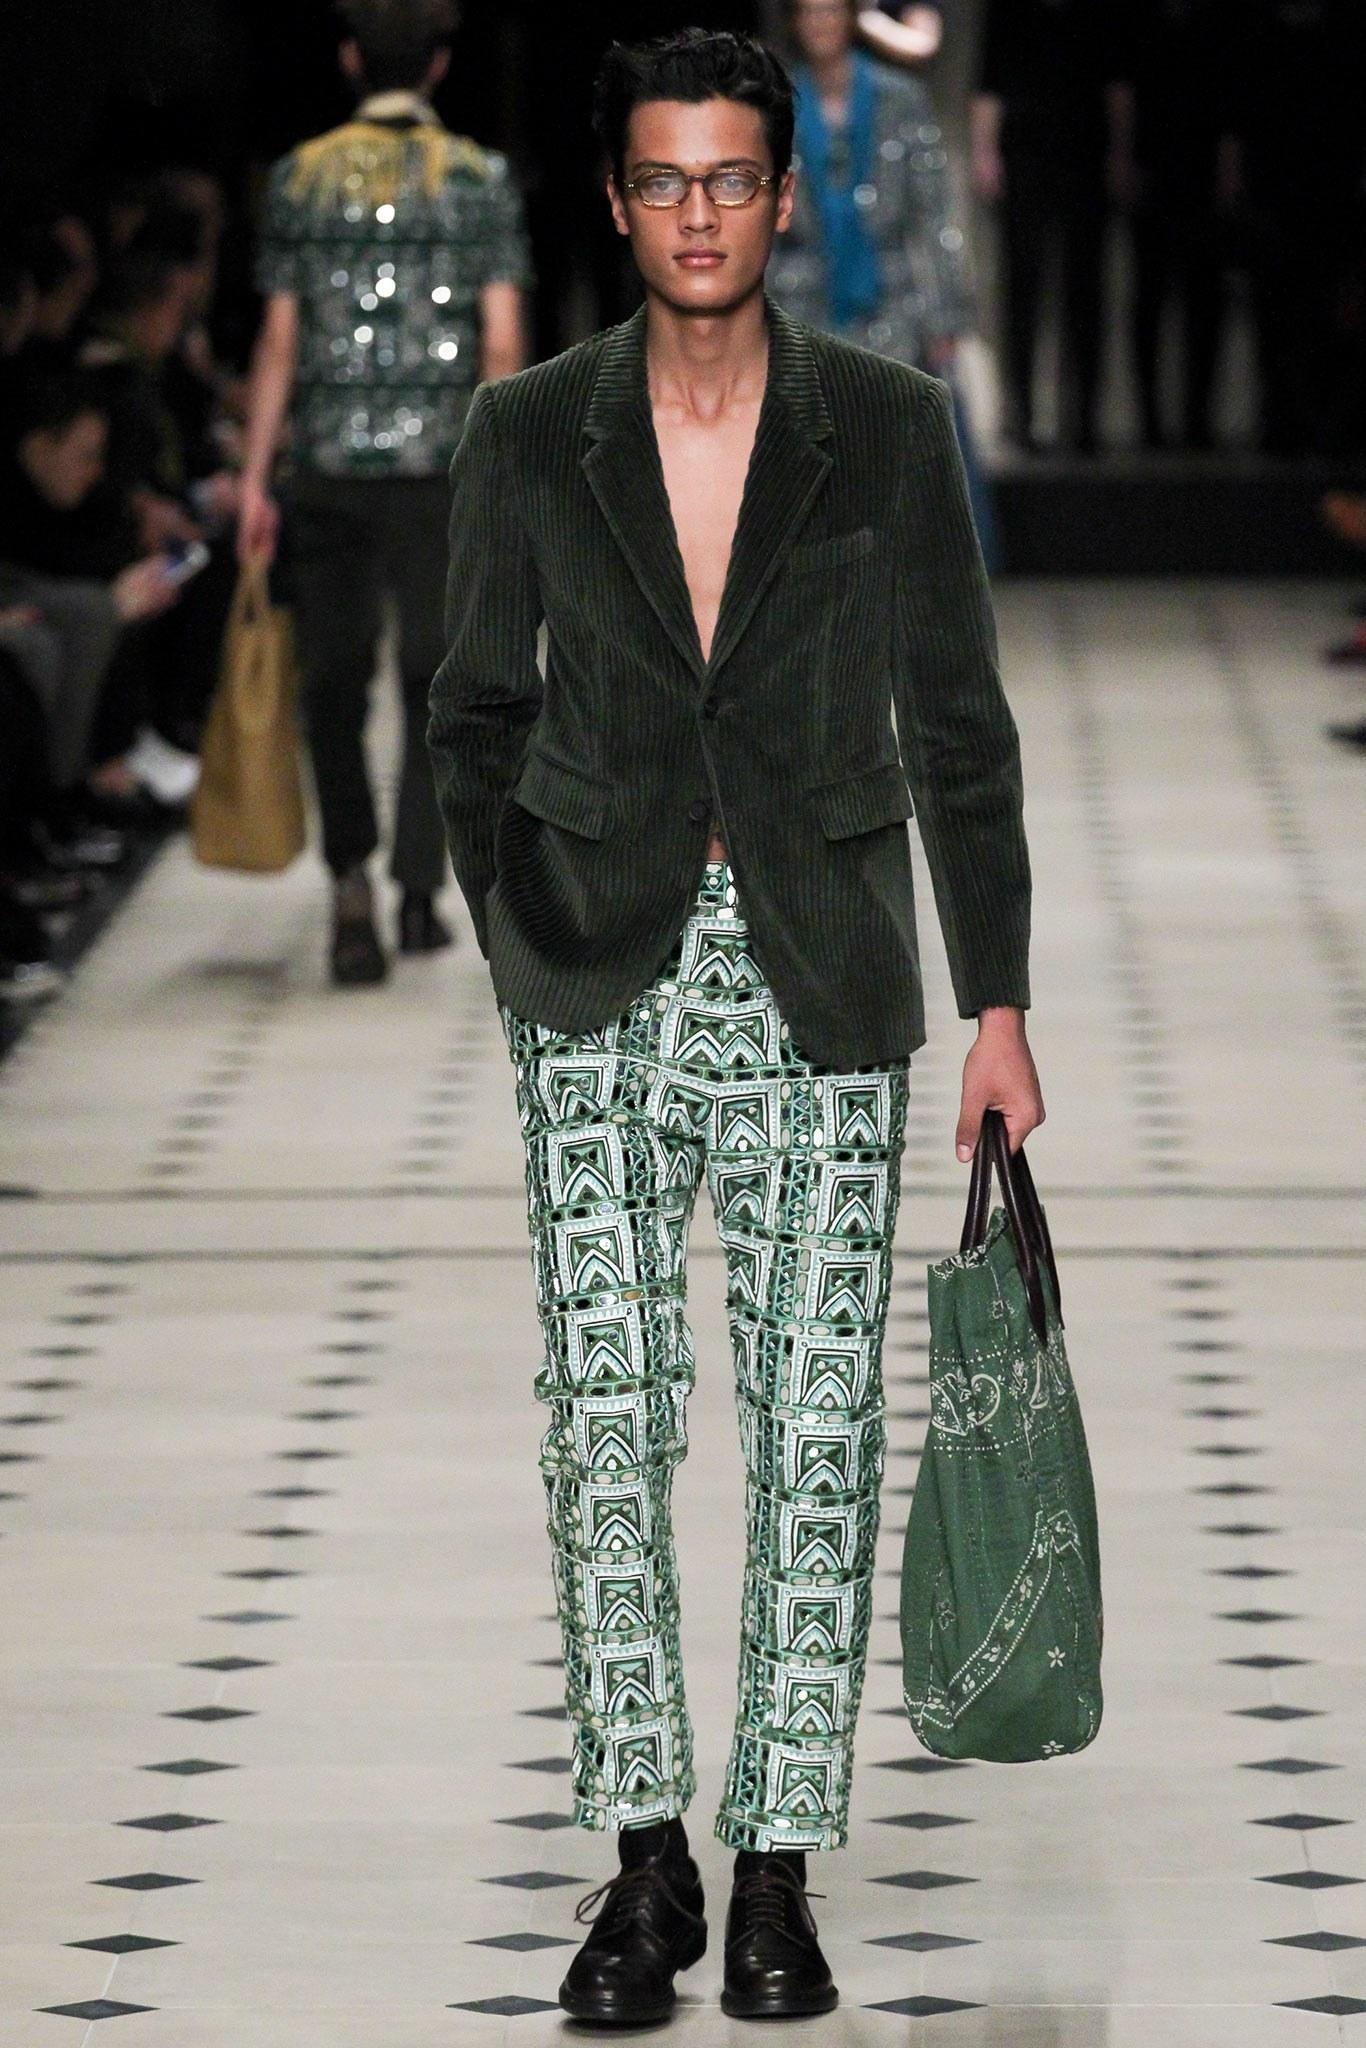 BURBERRY PRORSUM Menswear Fall Winter 2015 Collection runway pants come in exquisite green fern and white woven and embellished mirrored Rajasthan material, fully lined with a slim fit.  Burberry Prorsum's last Menswear collection to show under